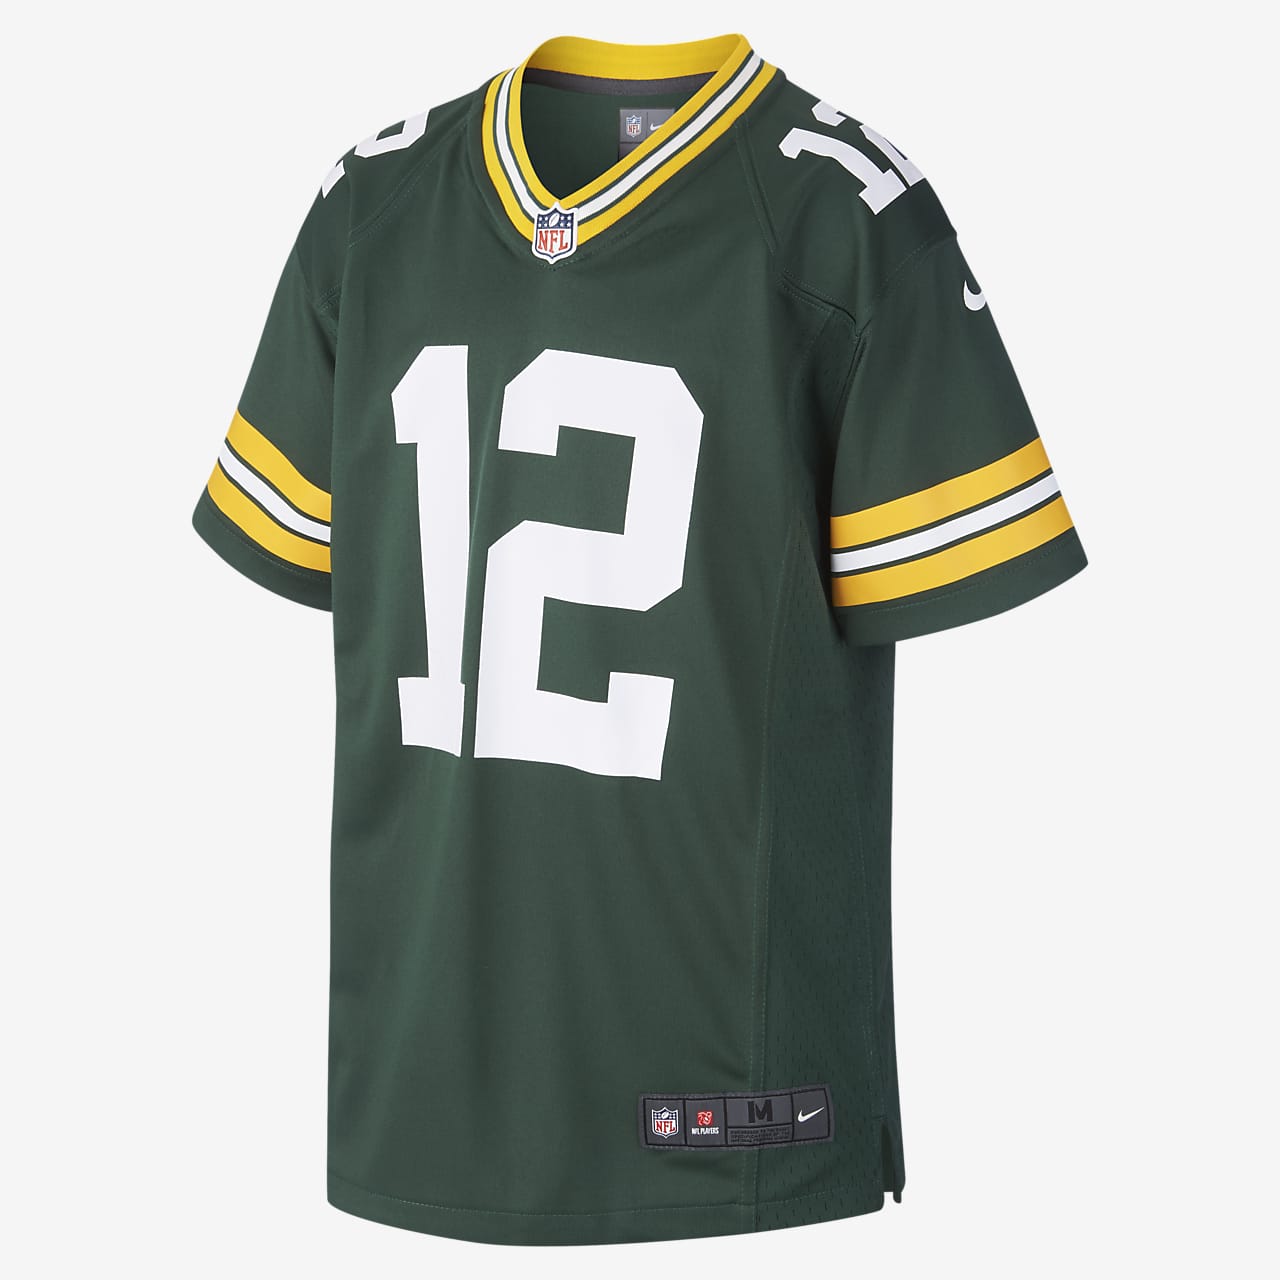 NFL Green Bay Packers Game Jersey 